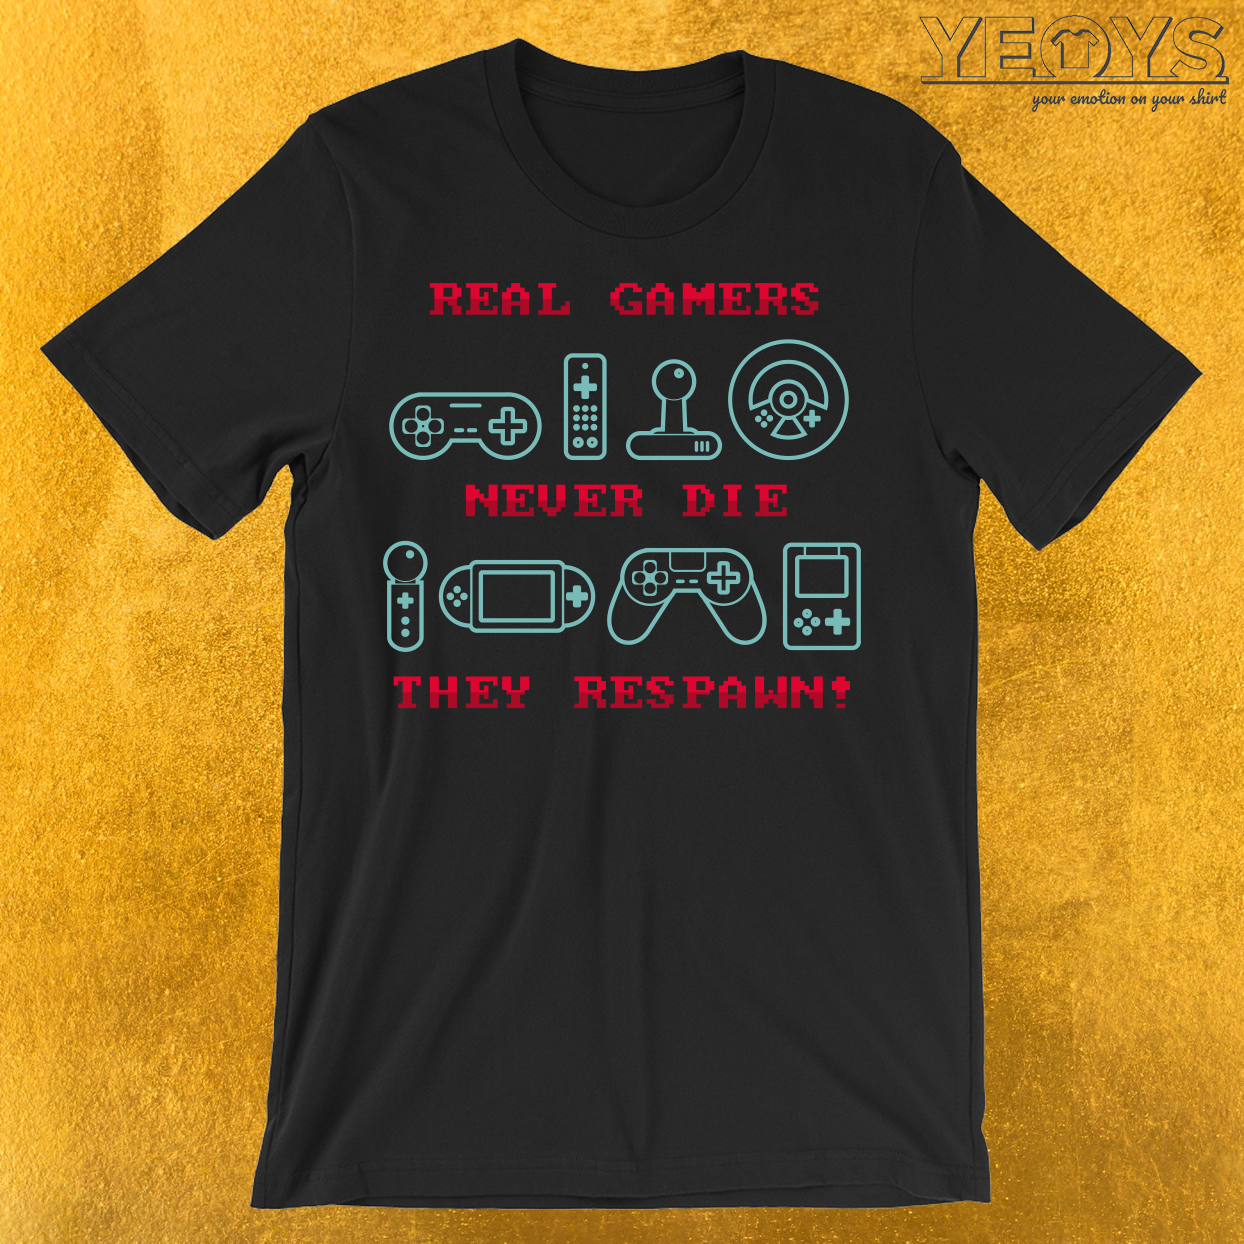 Real Gamers Never Die They Respawn T-Shirt